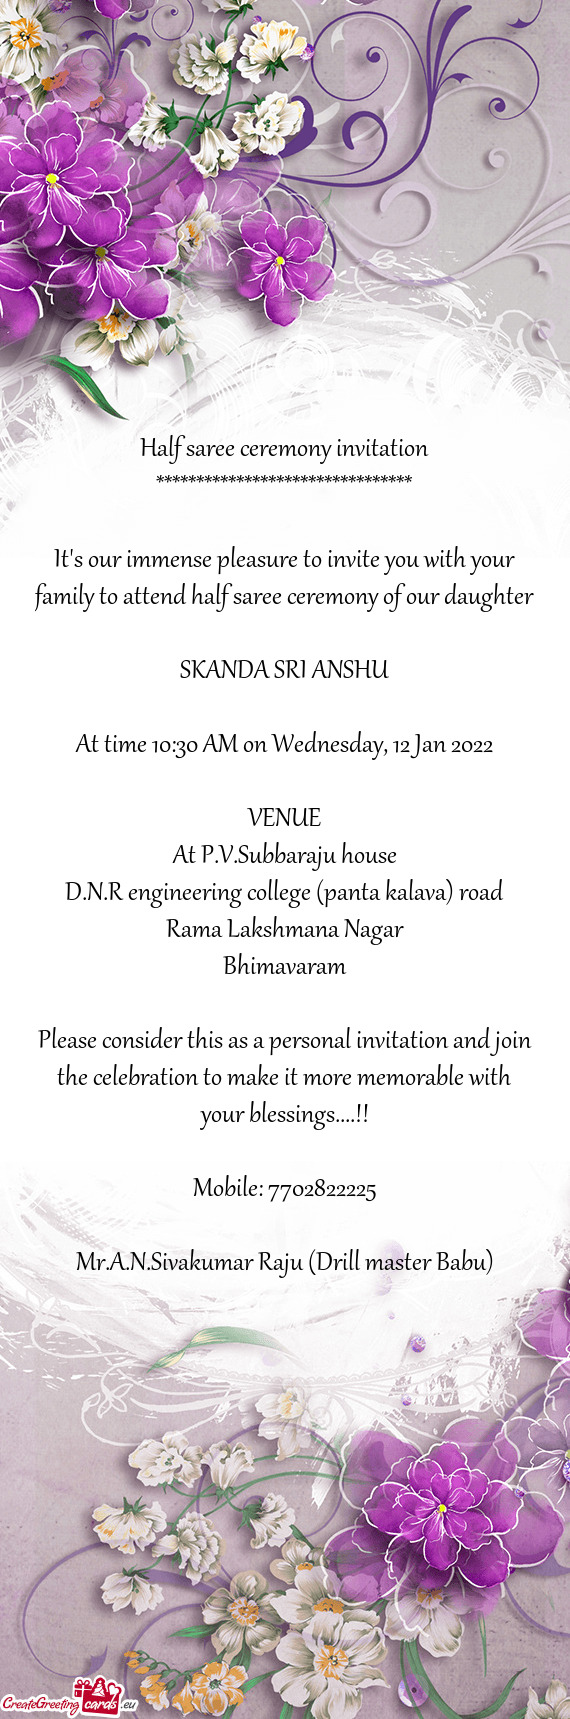 It's our immense pleasure to invite you with your family to attend half saree ceremony of our daught